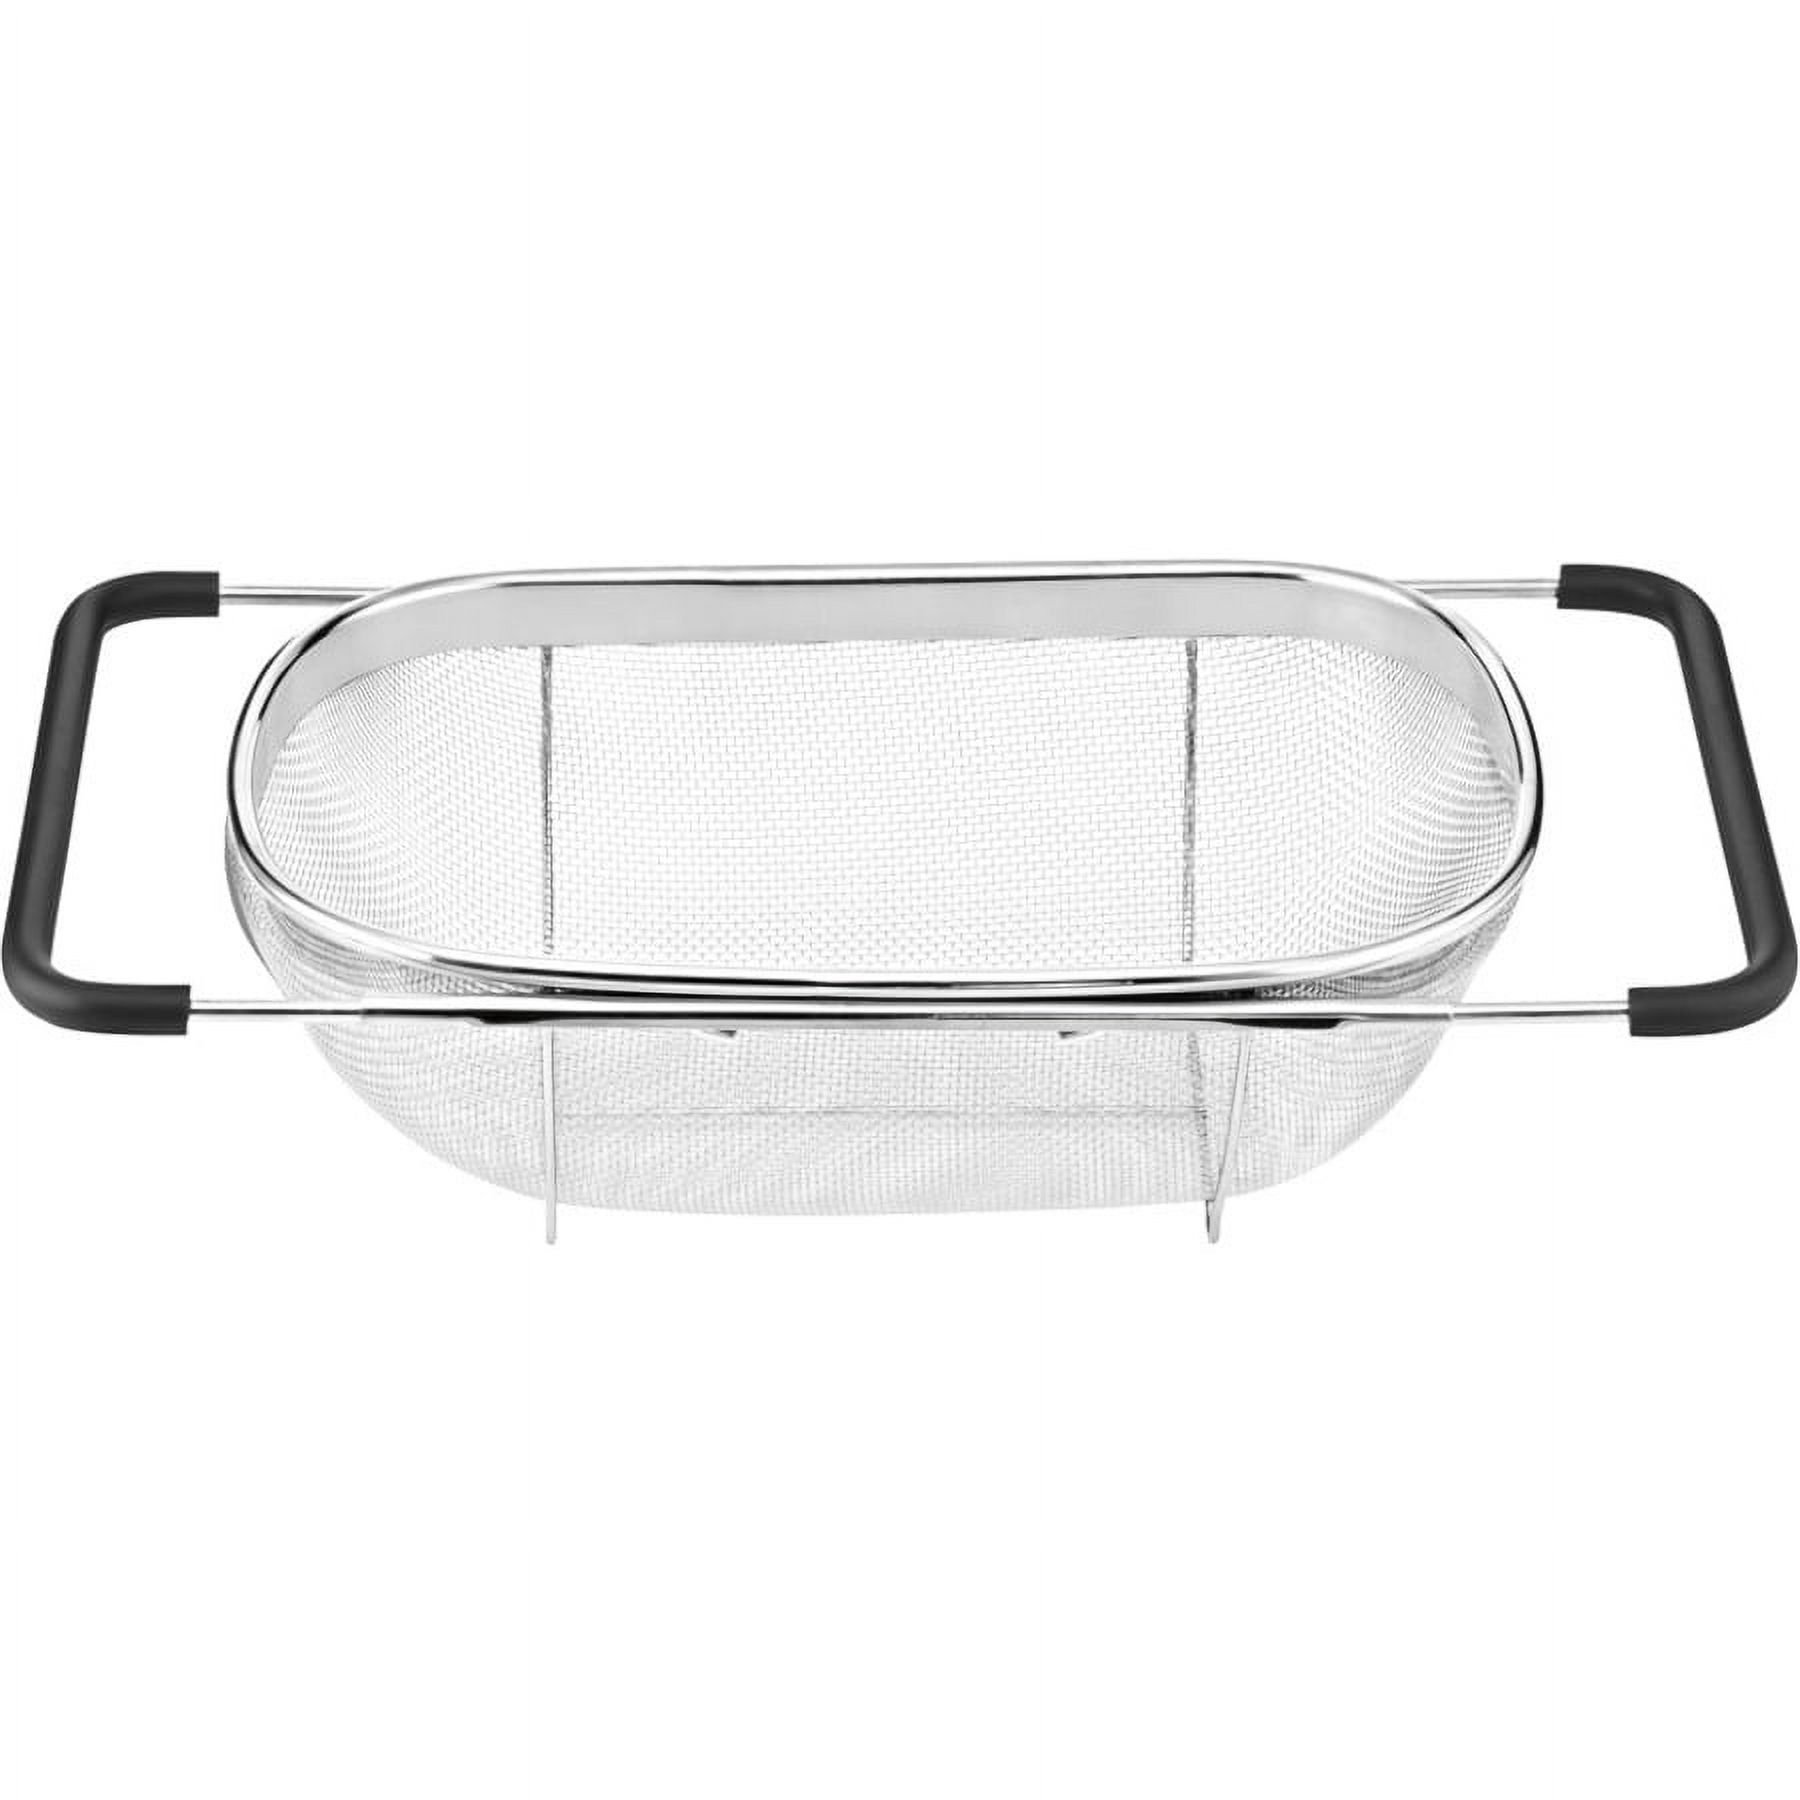 Cuisinart Non-Handled Over the Sink Colander - image 2 of 4